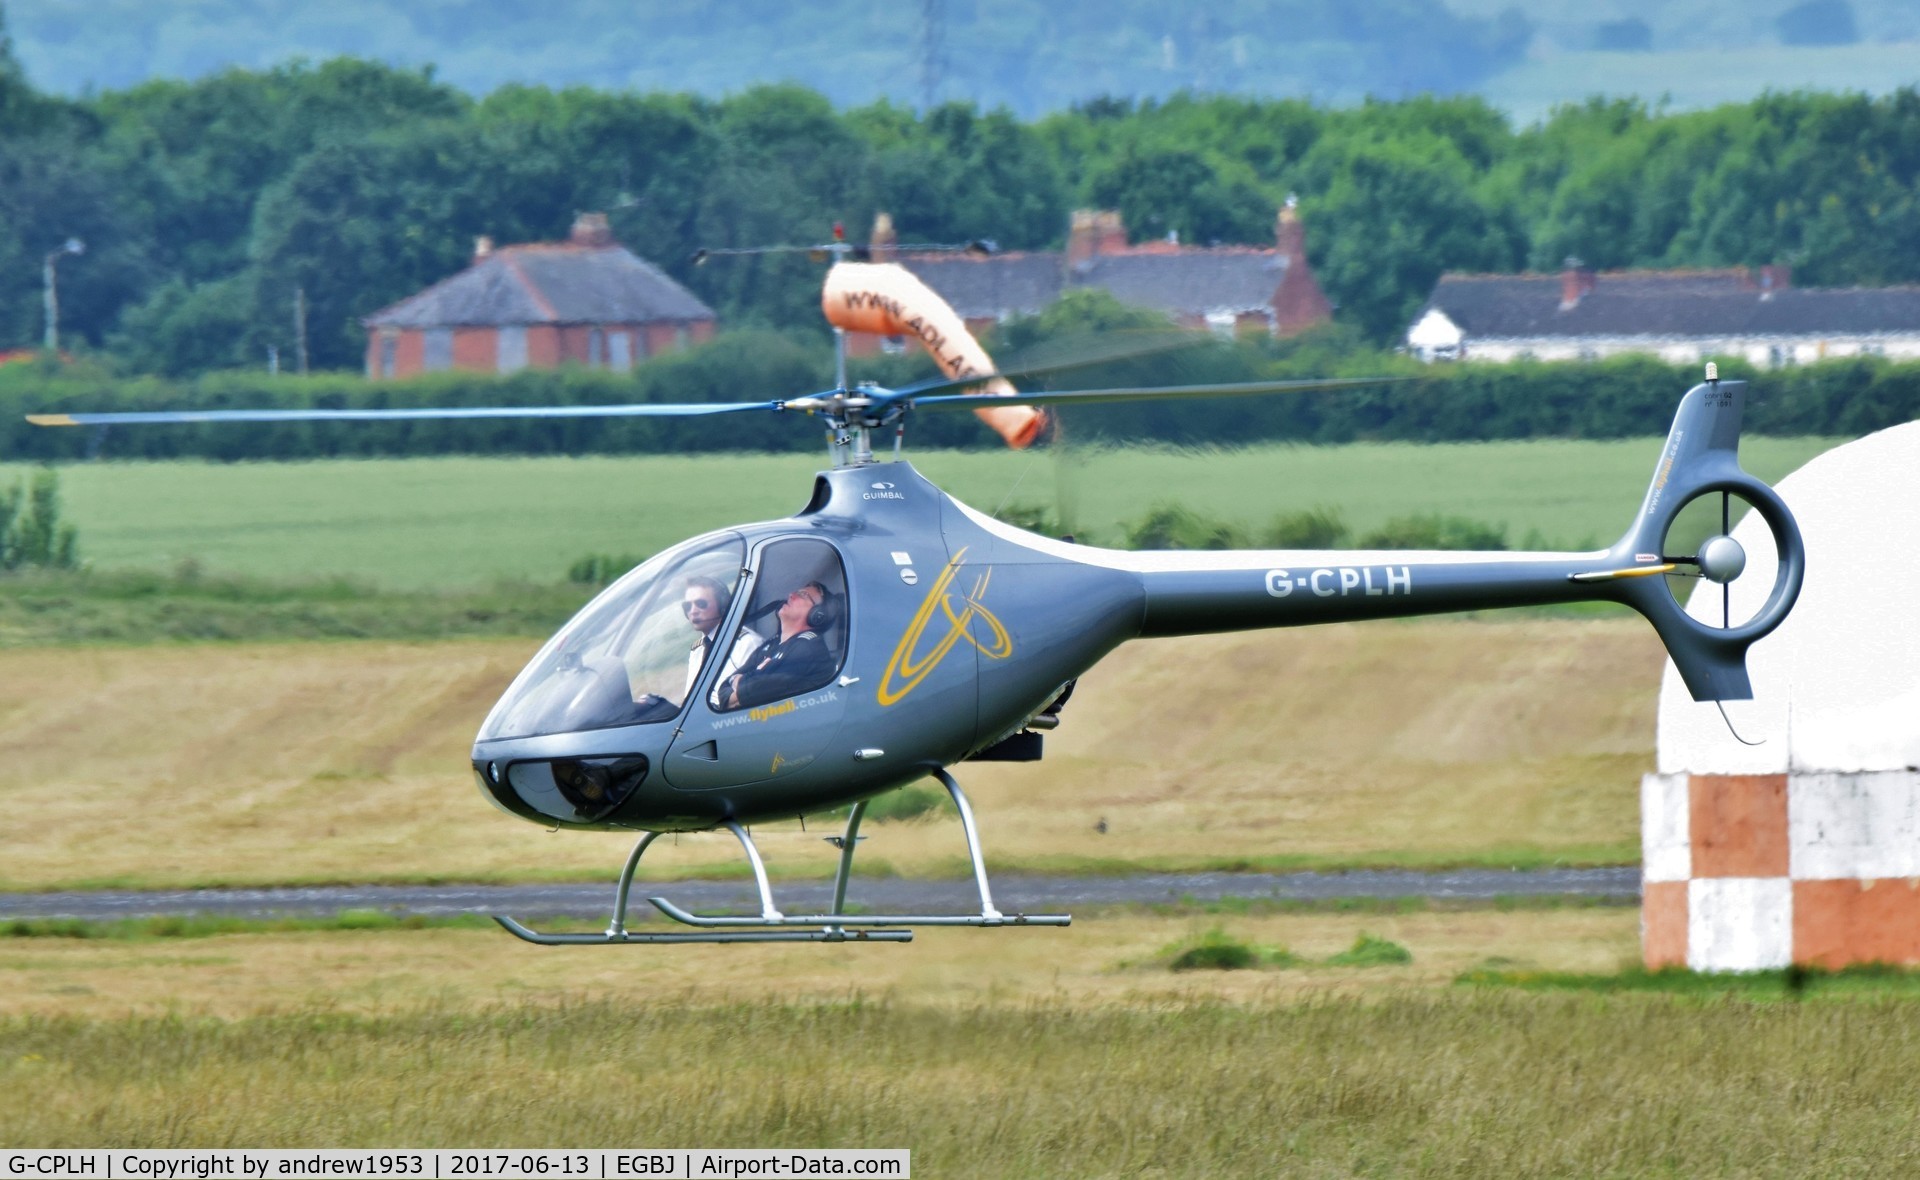 G-CPLH, 2015 Guimbal Cabri G2CA C/N 1091, G-CPLH landing at Gloucestershire Airport.